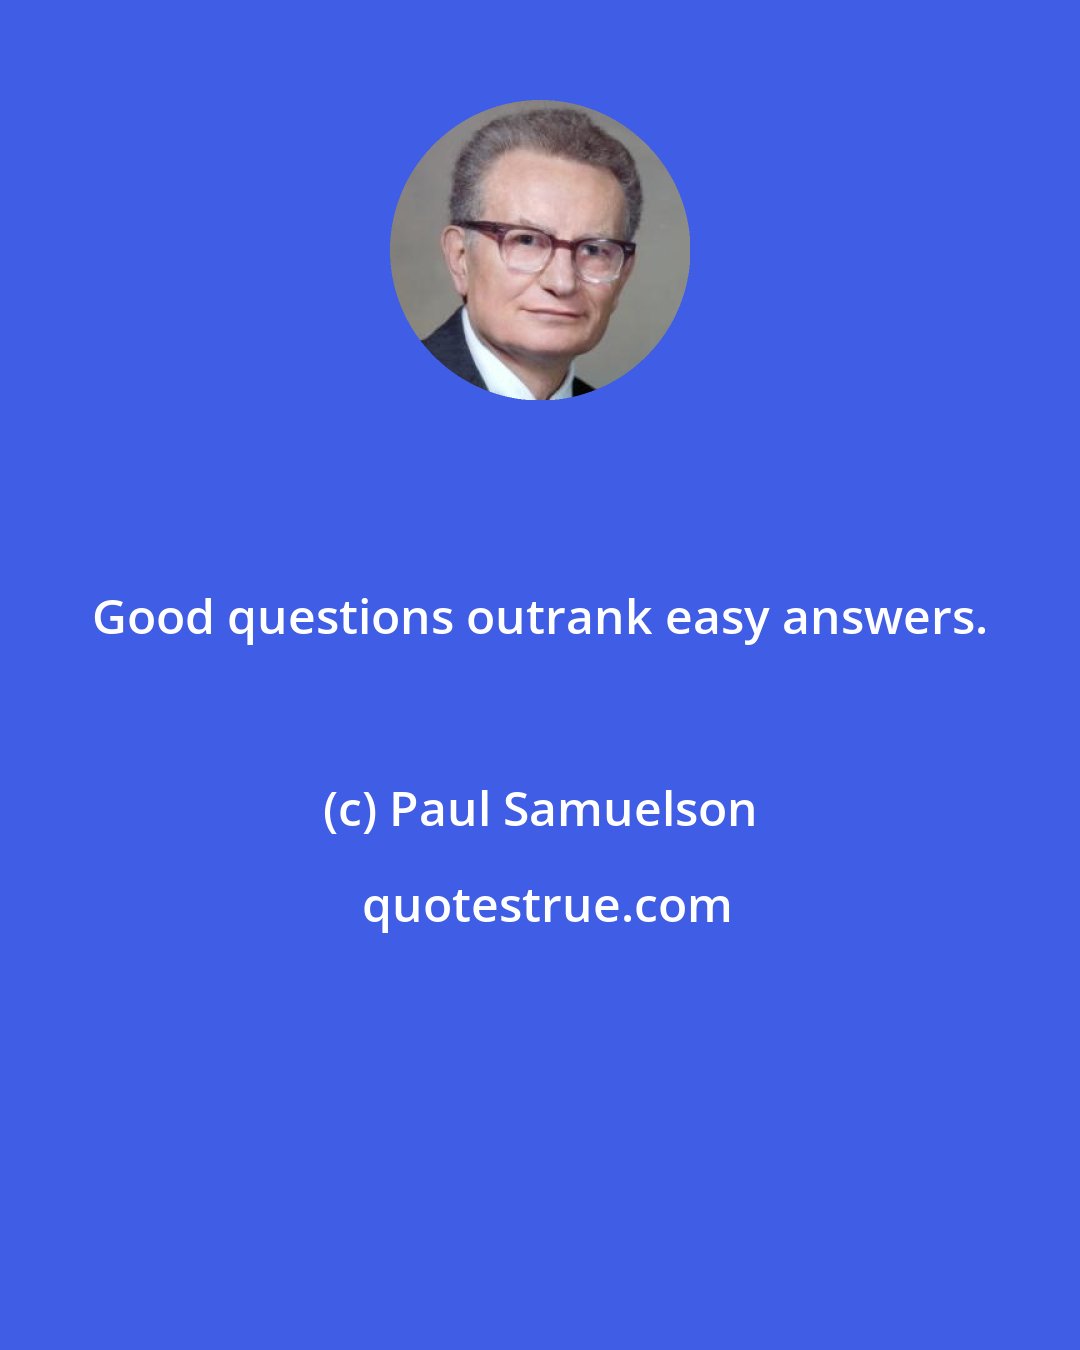 Paul Samuelson: Good questions outrank easy answers.